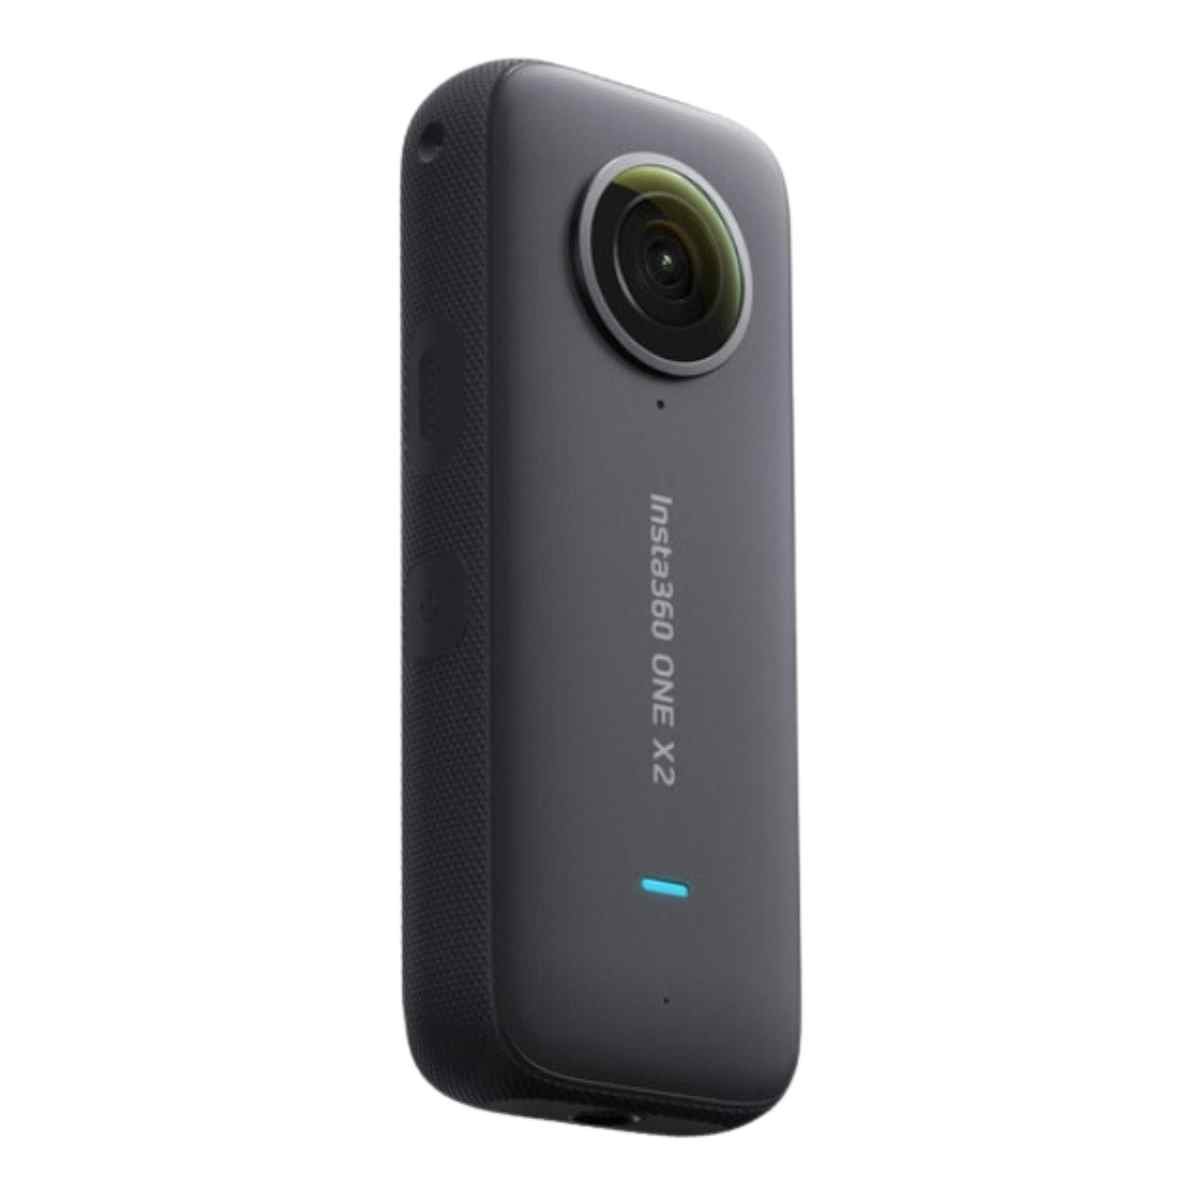 Insta360's X3 360-degree action cam will blow you away